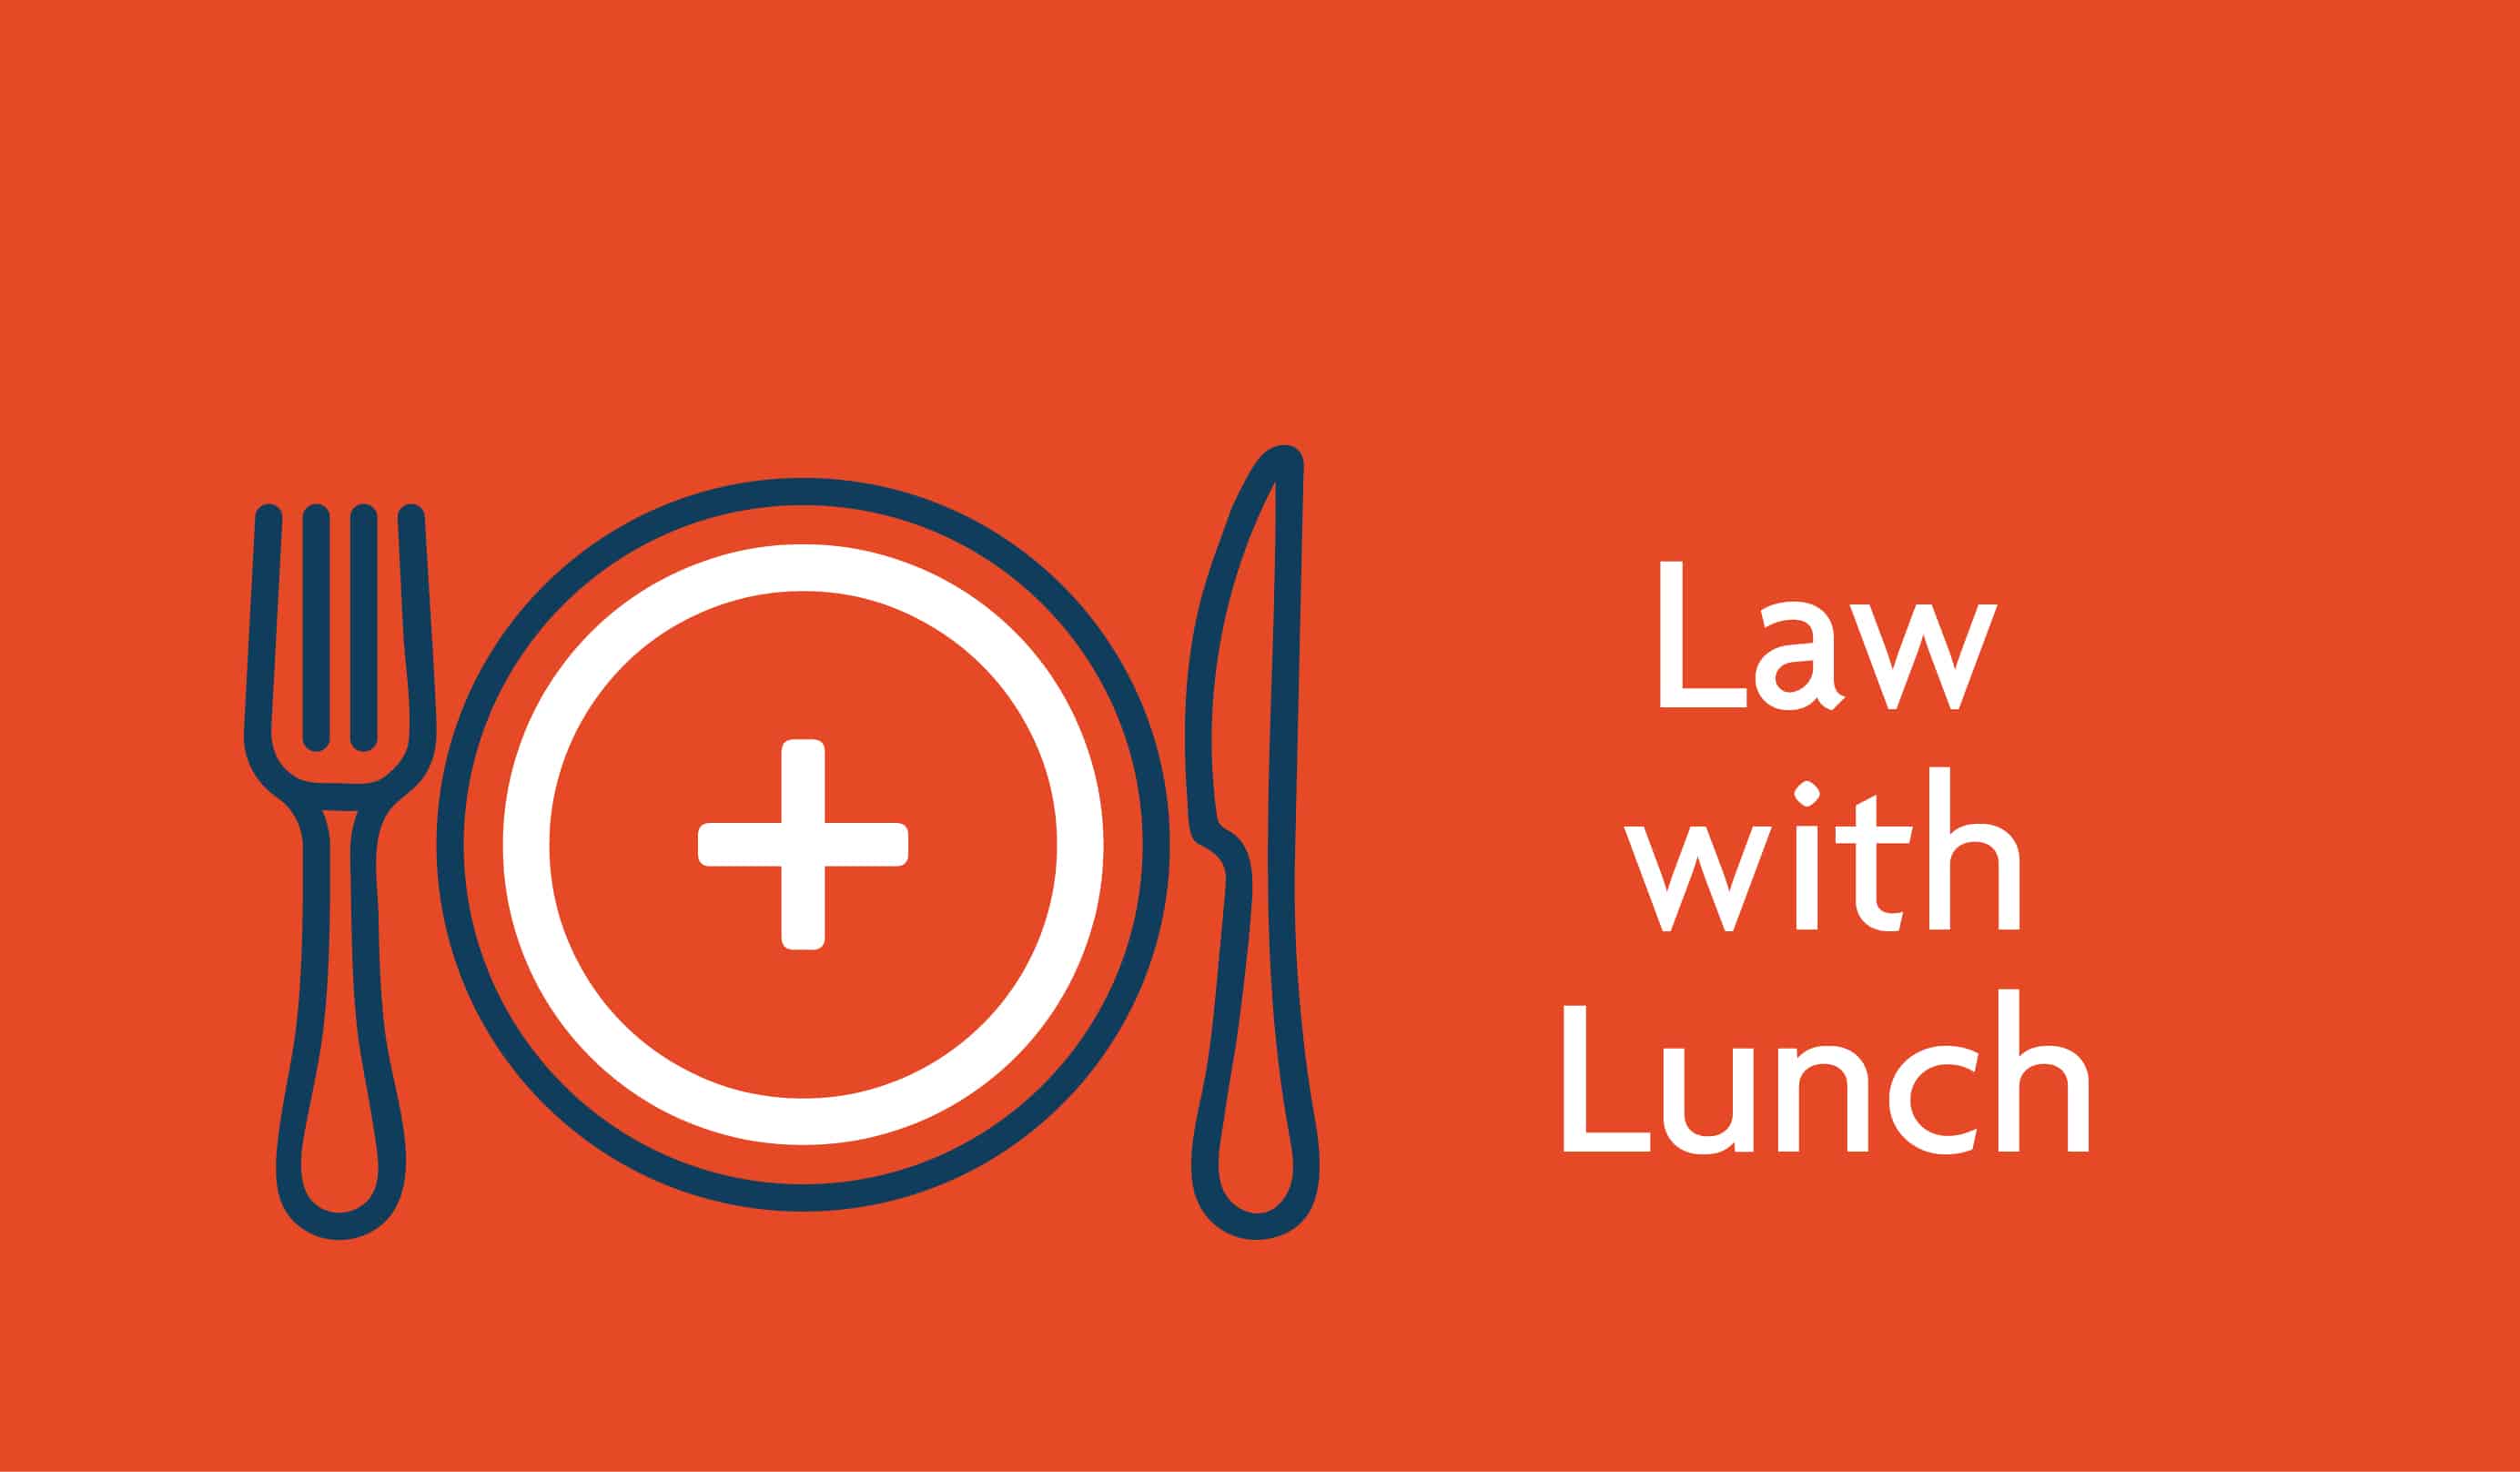 CLINICAL NEGLIGENCE CASE LAW UPDATE | ‘LAW WITH LUNCH’ WEBINAR SERIES | 18 January 2023